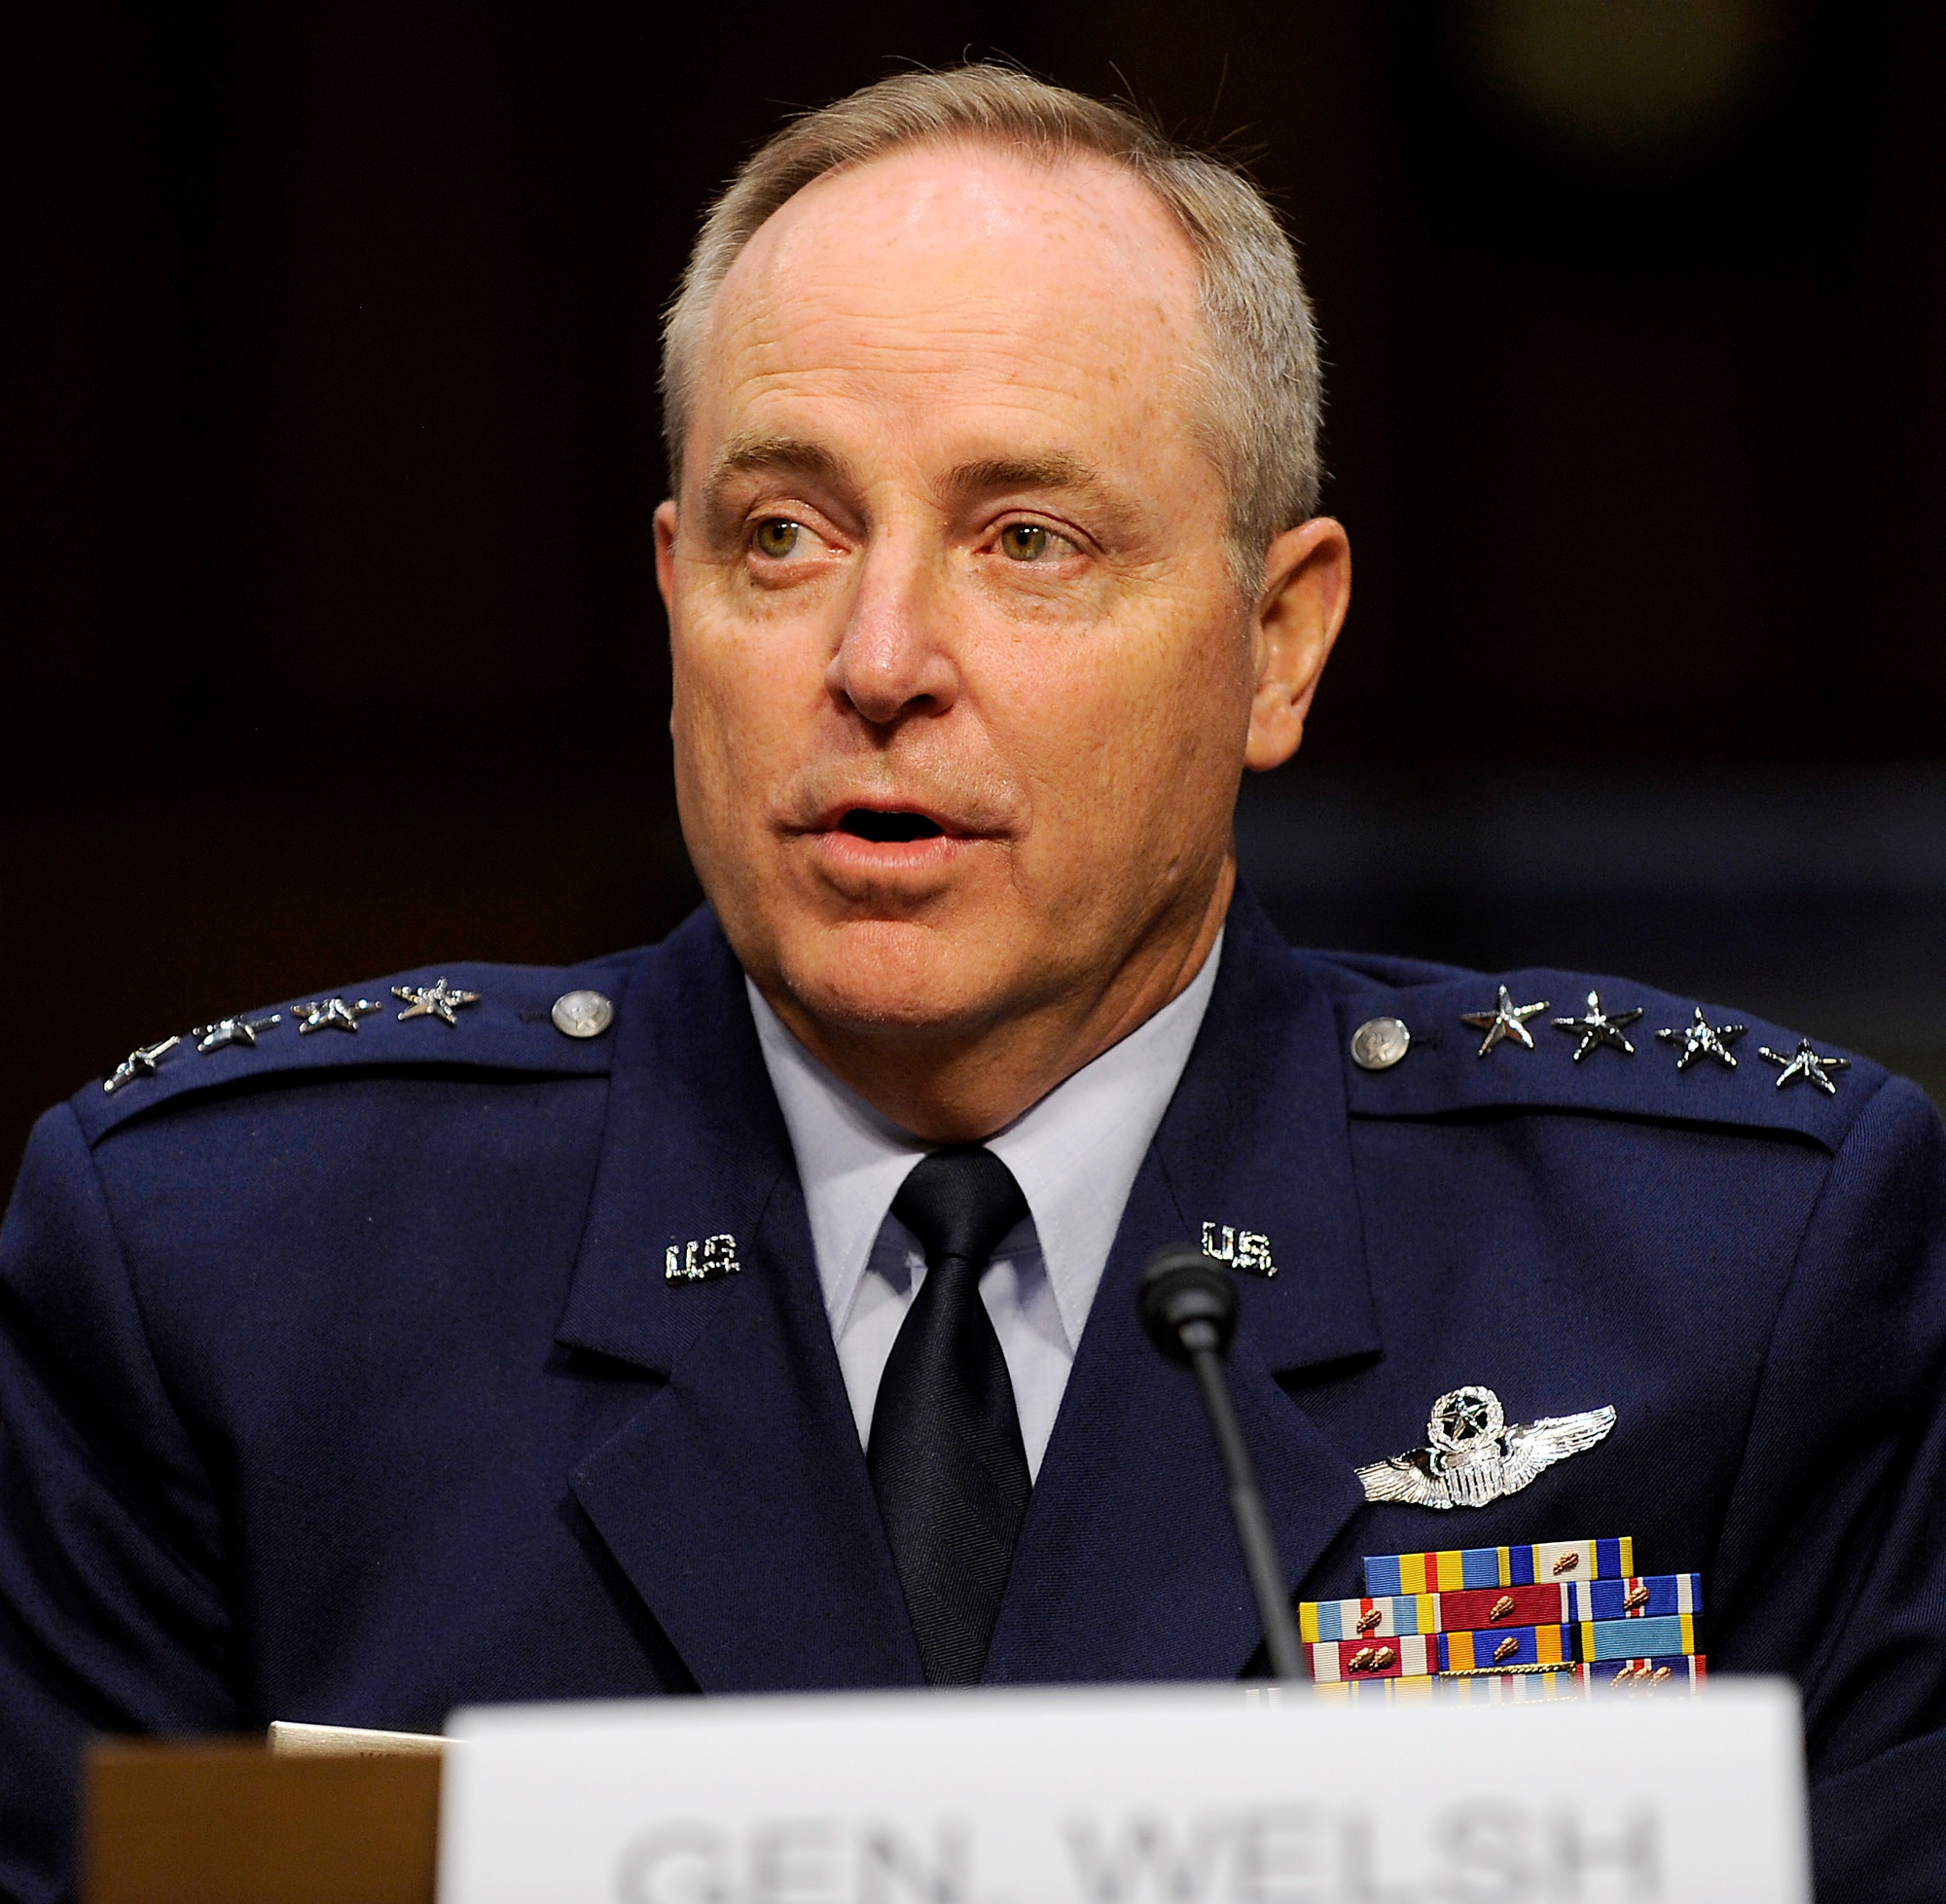 Gen. Mark A. Welsh III, the commander of U.S. Air Forces in Europe, testifies before the Senate Armed Services Committee in Washington, D.C., on July 19, 2012, as part of the confirmation process to serve as the 20th Air Force Chief of Staff.  If confirmed, Welsh will replace Gen. Norton Schwartz, who retires Aug. 10.  (U.S. Air Force photo/Scott M. Ash)